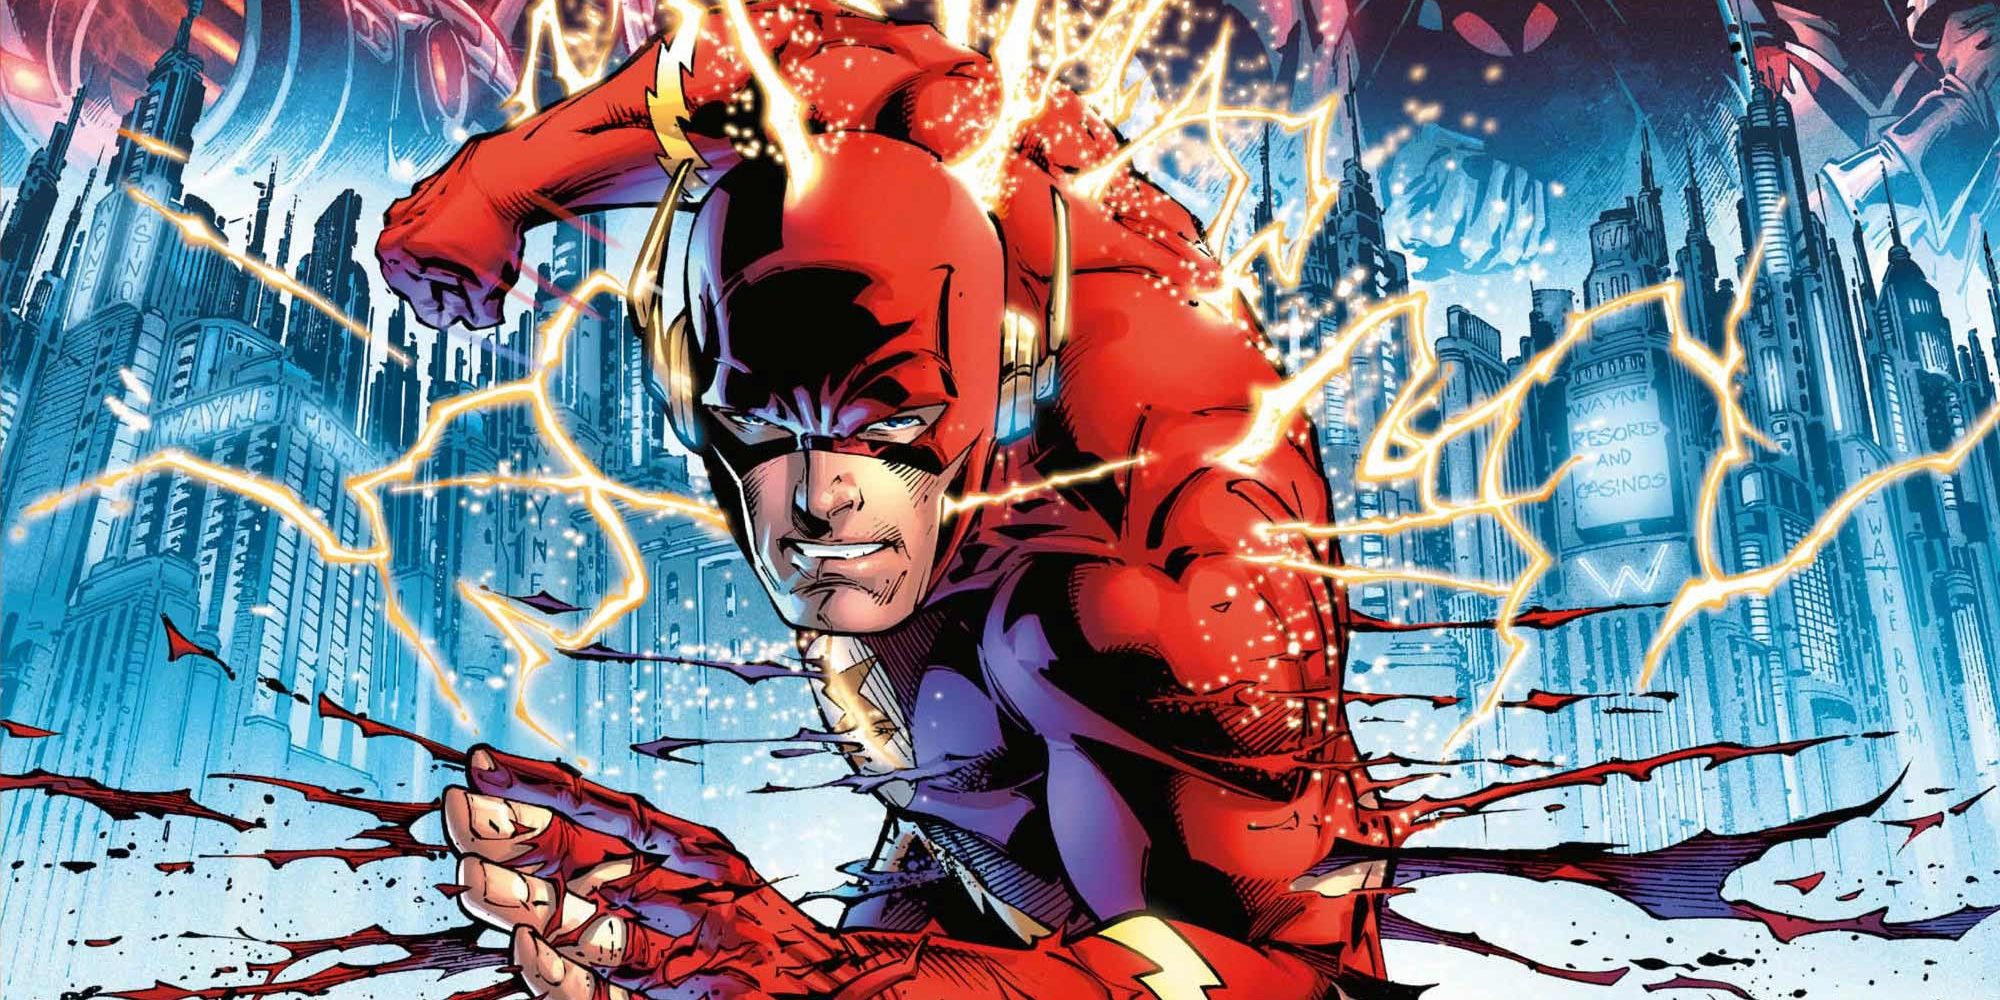 The Flash runs away from a city in the DC comic book Flashpoint.